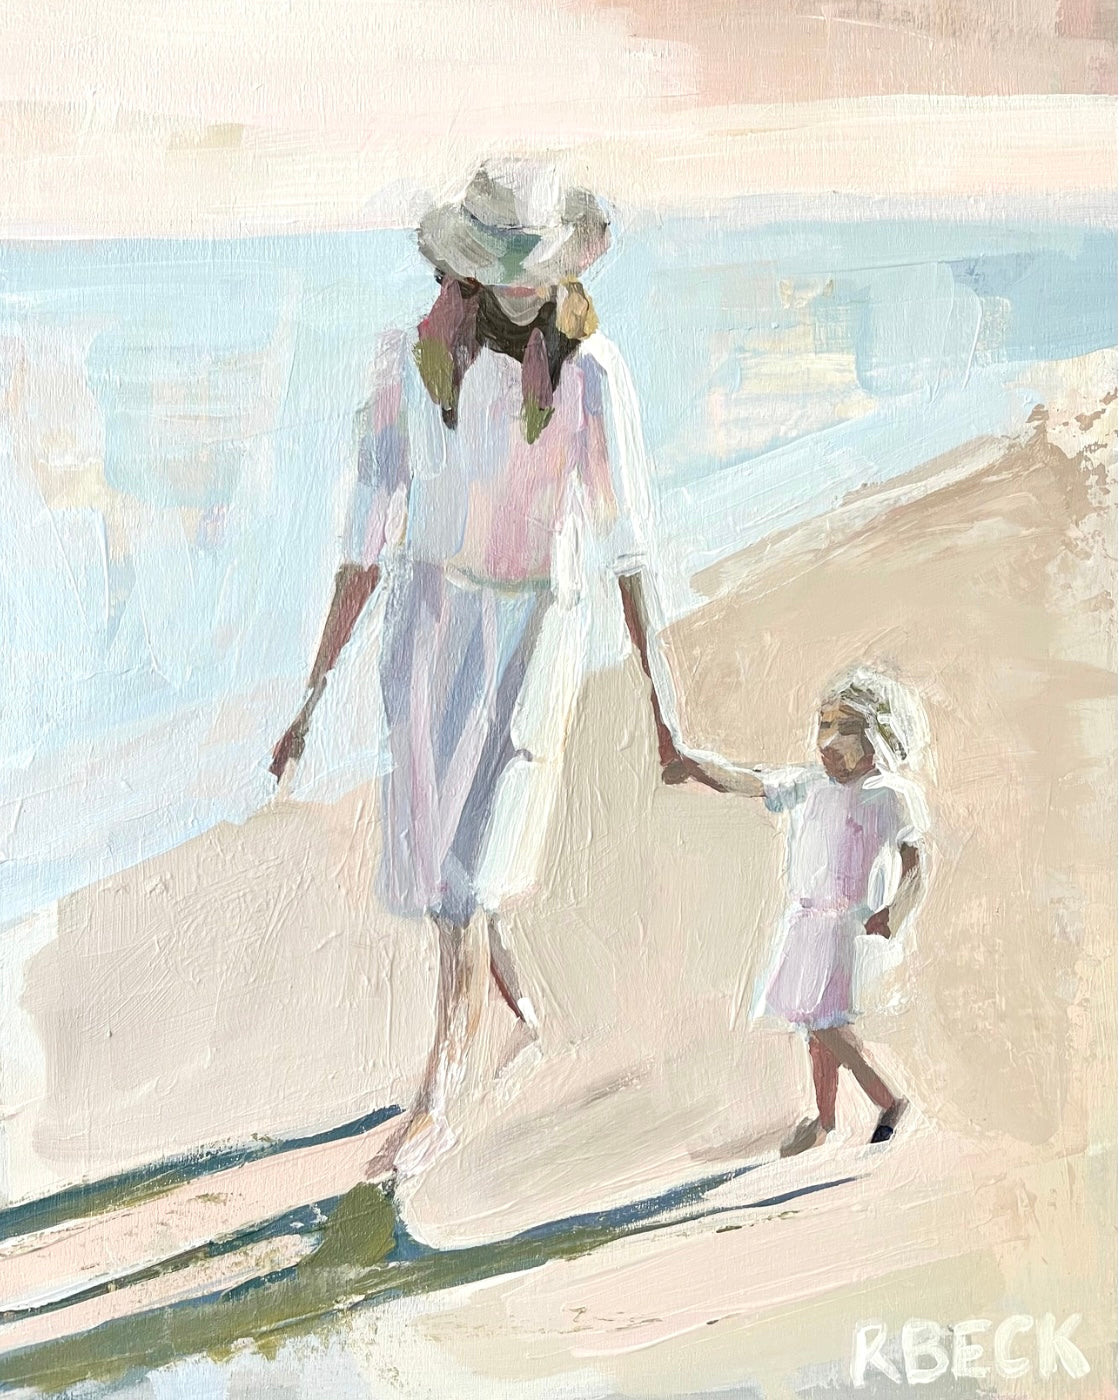 ryan beck art, painting, woman and daughter walking on beach, artwork print, mothers day gift, mothers day painting